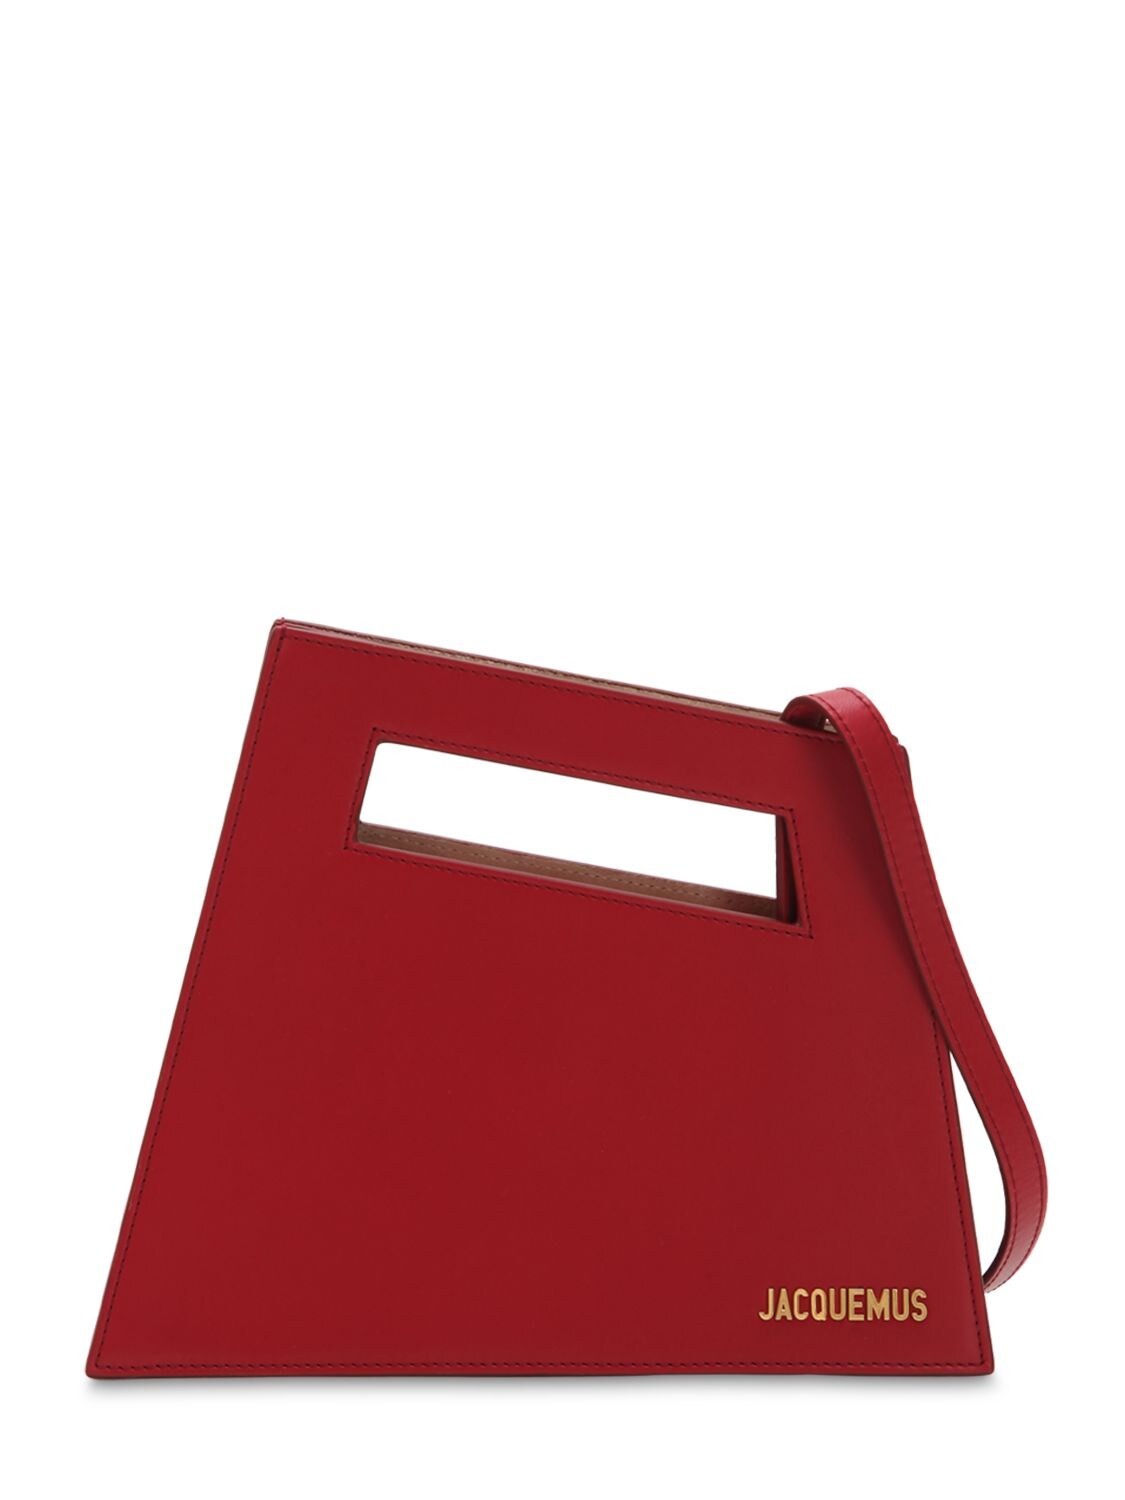 Jacquemus Le Petit Leather Shoulder Bag In Red